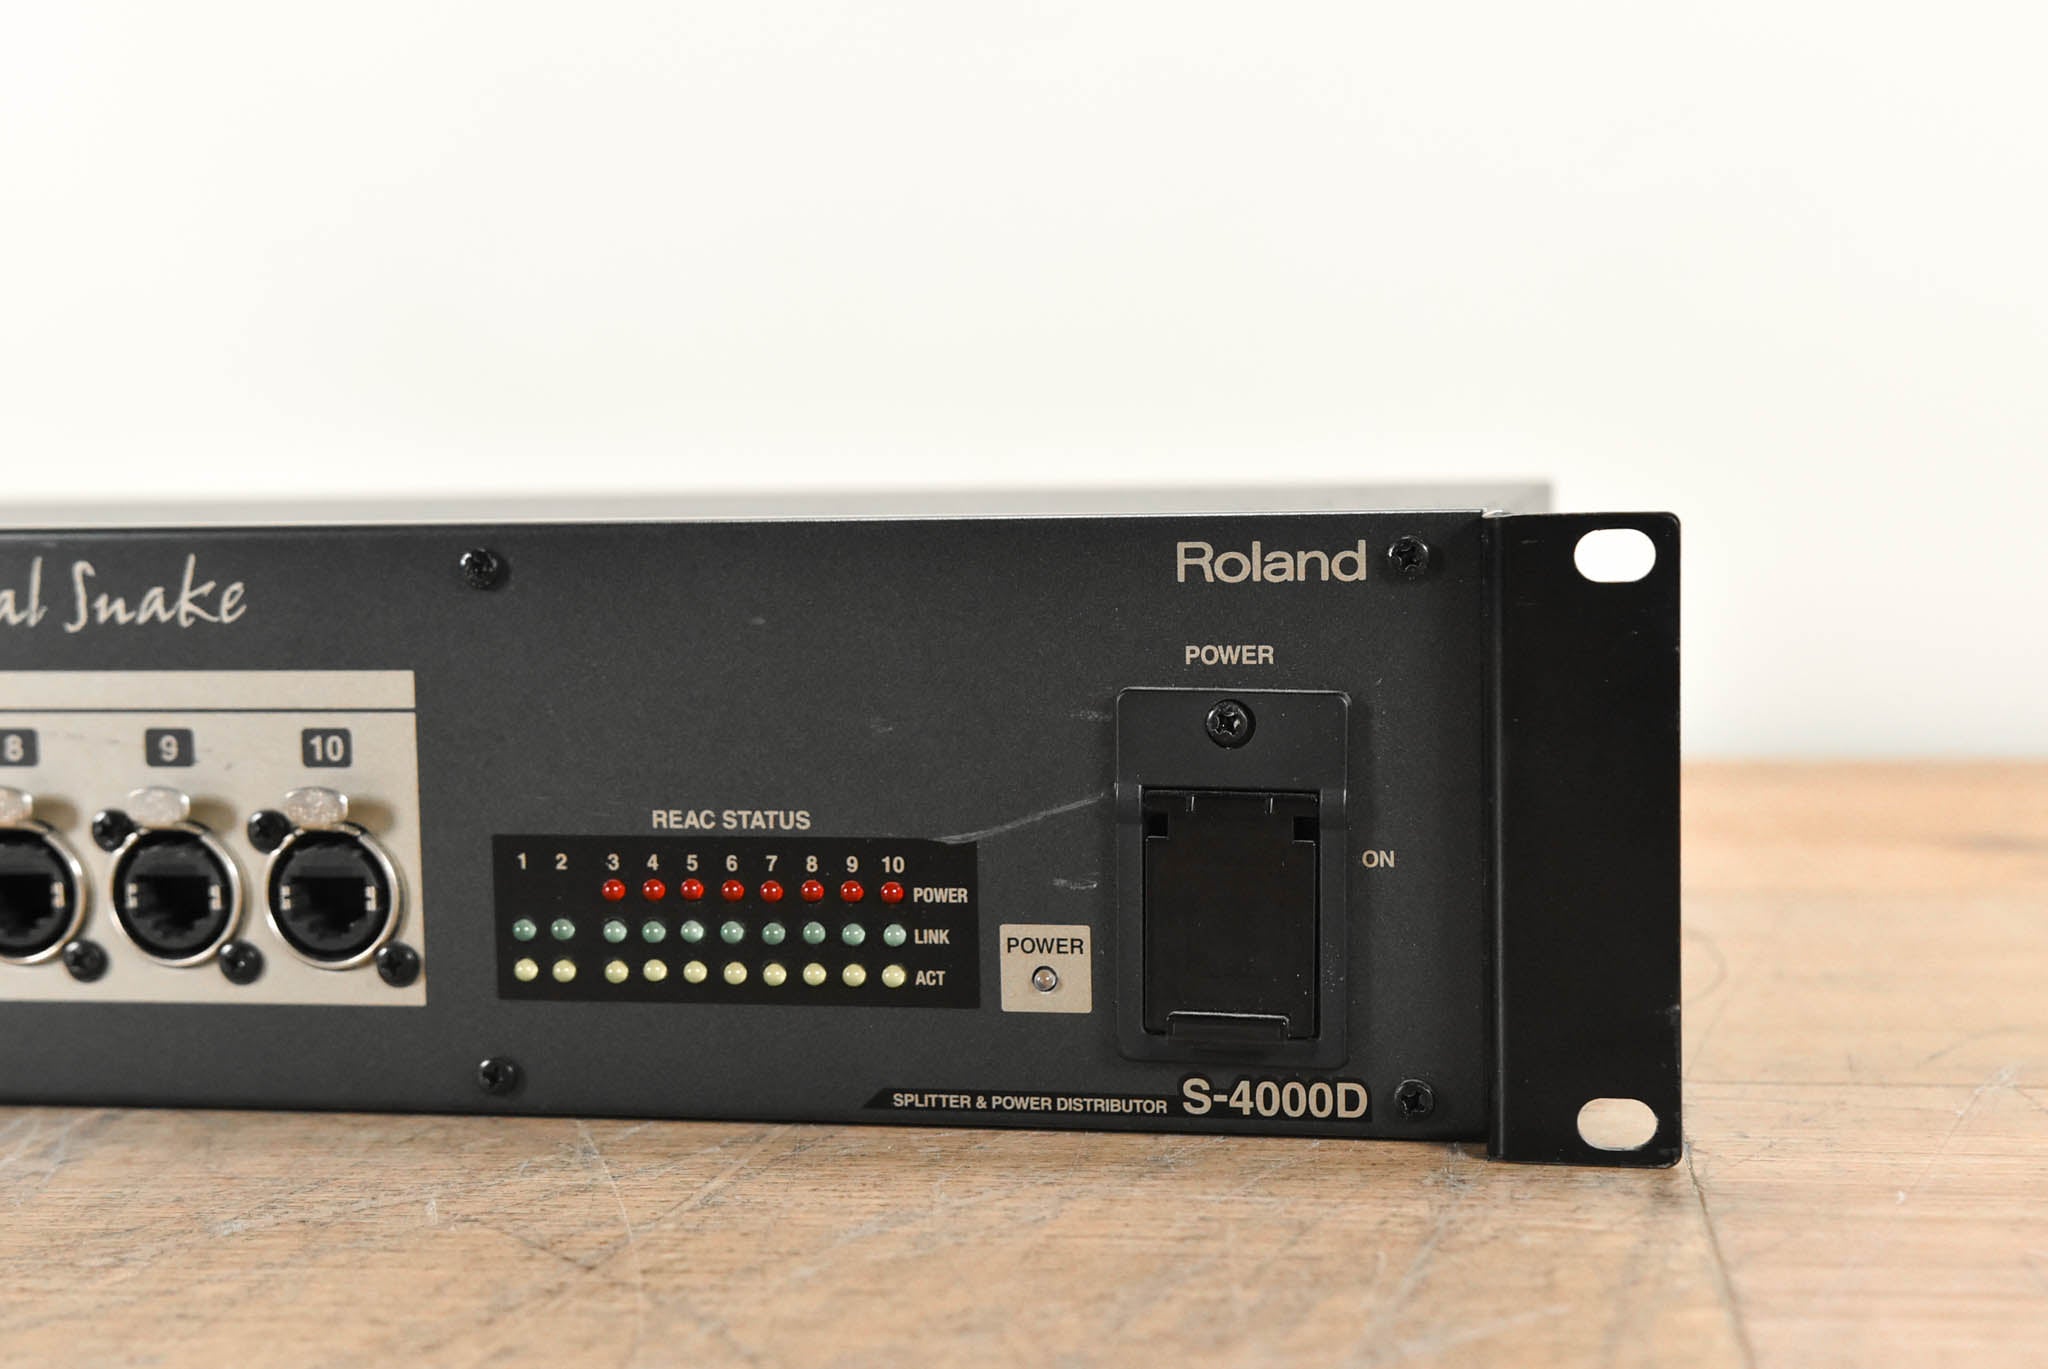 Roland S-4000D Splitter and Power Distributor for M-48 Personal Mixers